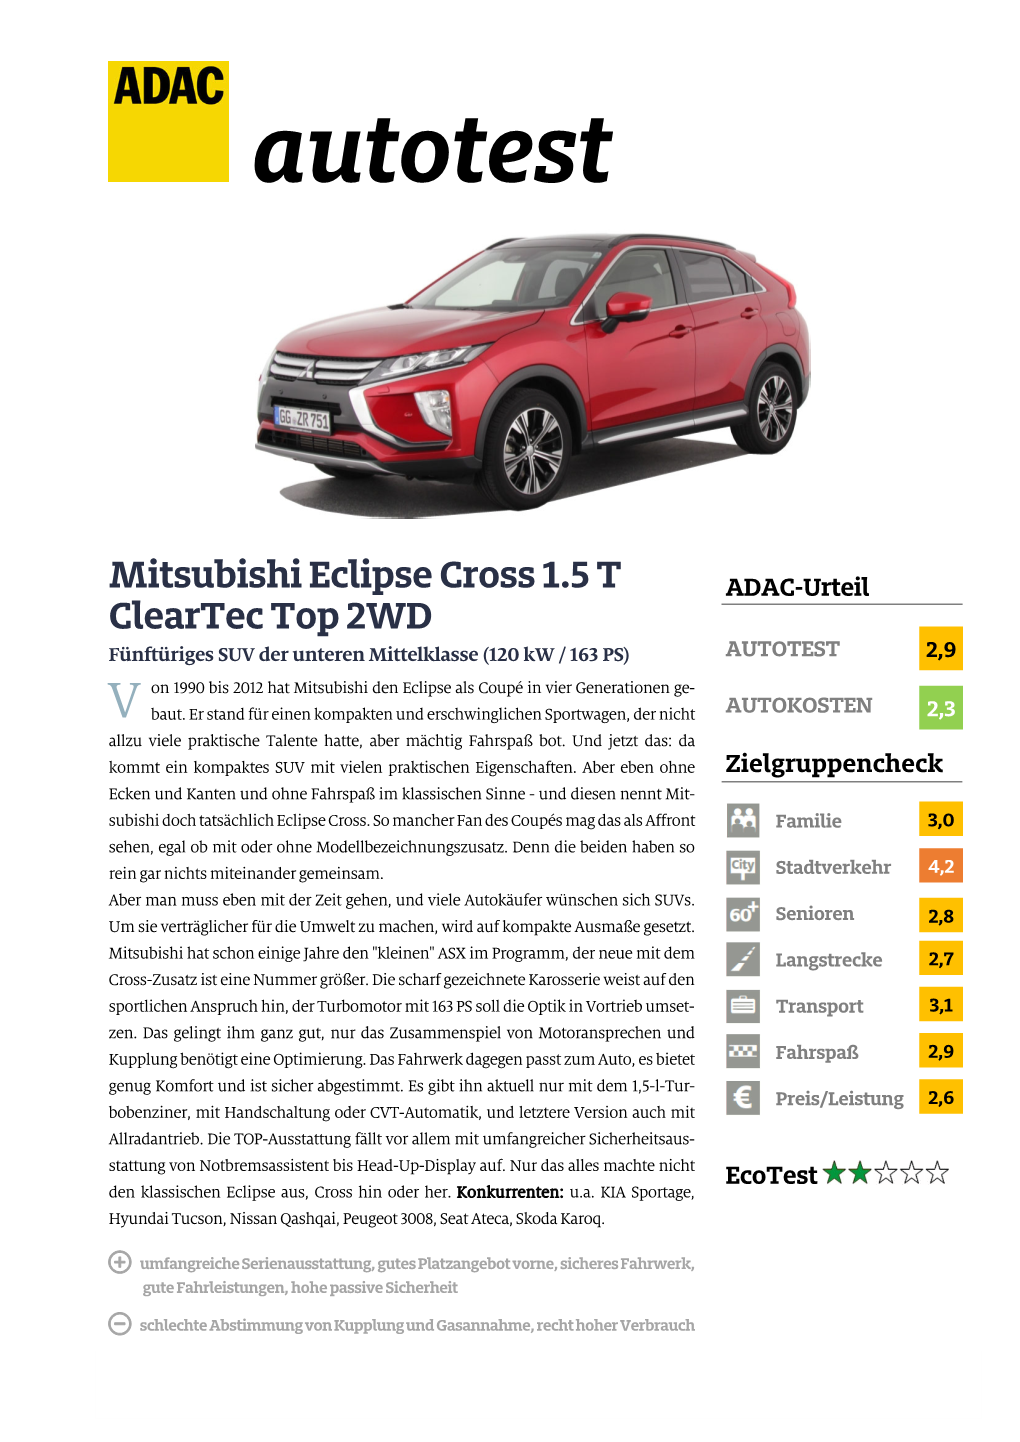 Mitsubishi Eclipse Cross 1.5 T Cleartec Top 2WD